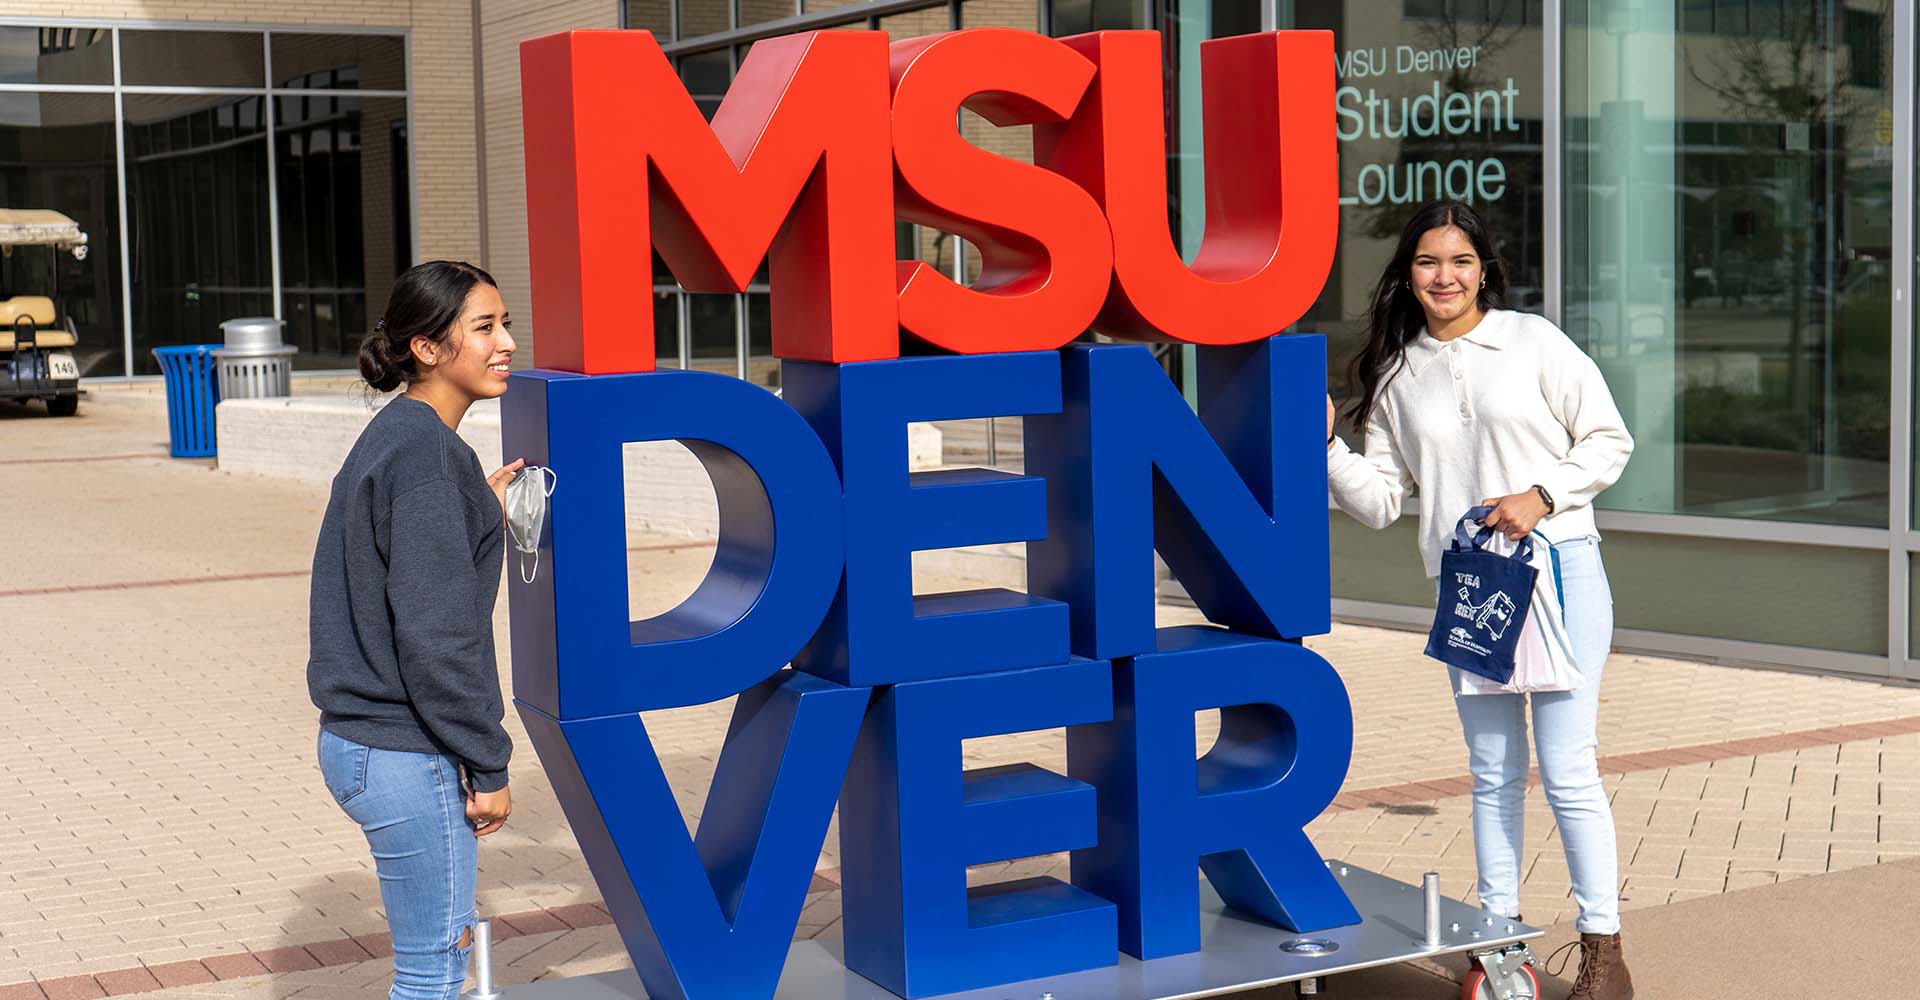 Prospective students at MSU Denver's Open House event.